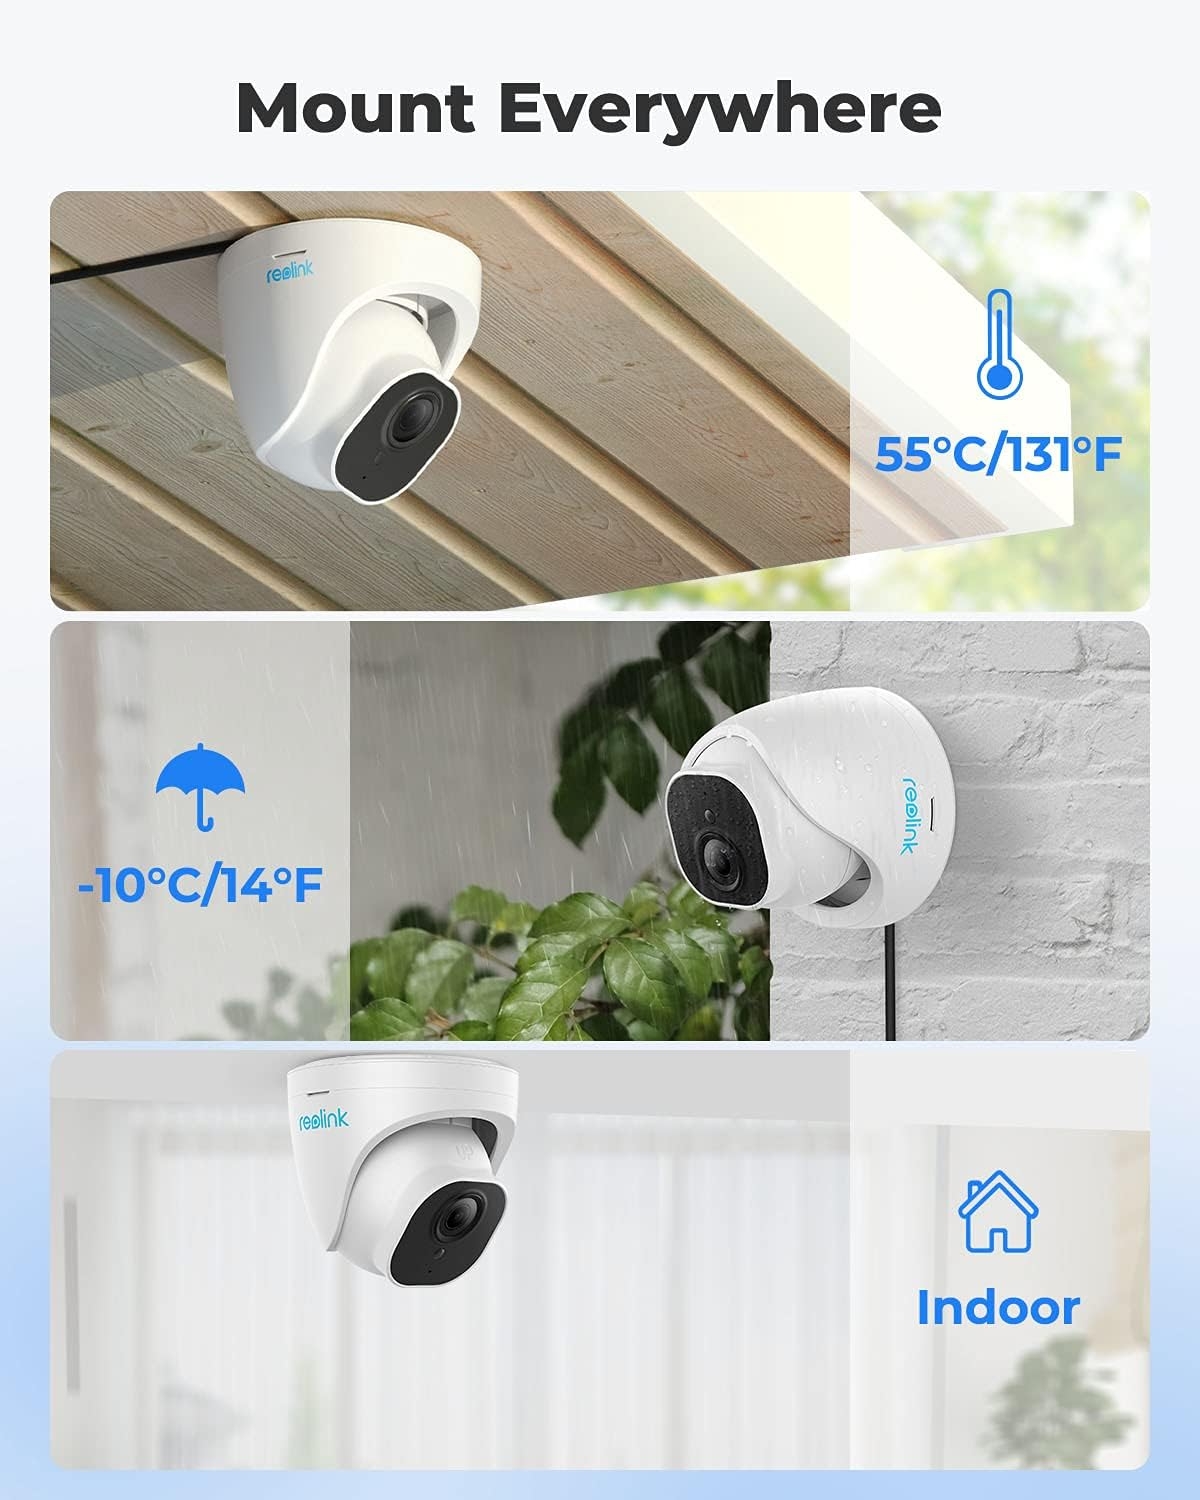 REOLINK PoE IP Camera Outdoor 5MP(2560x1920 at 30 FPS) HD Video Surveillance Work with Smart Home, 100ft IR Night Vision, Motion Detection, Up to 128GB Micro SD Card(Not Included), RLC-520